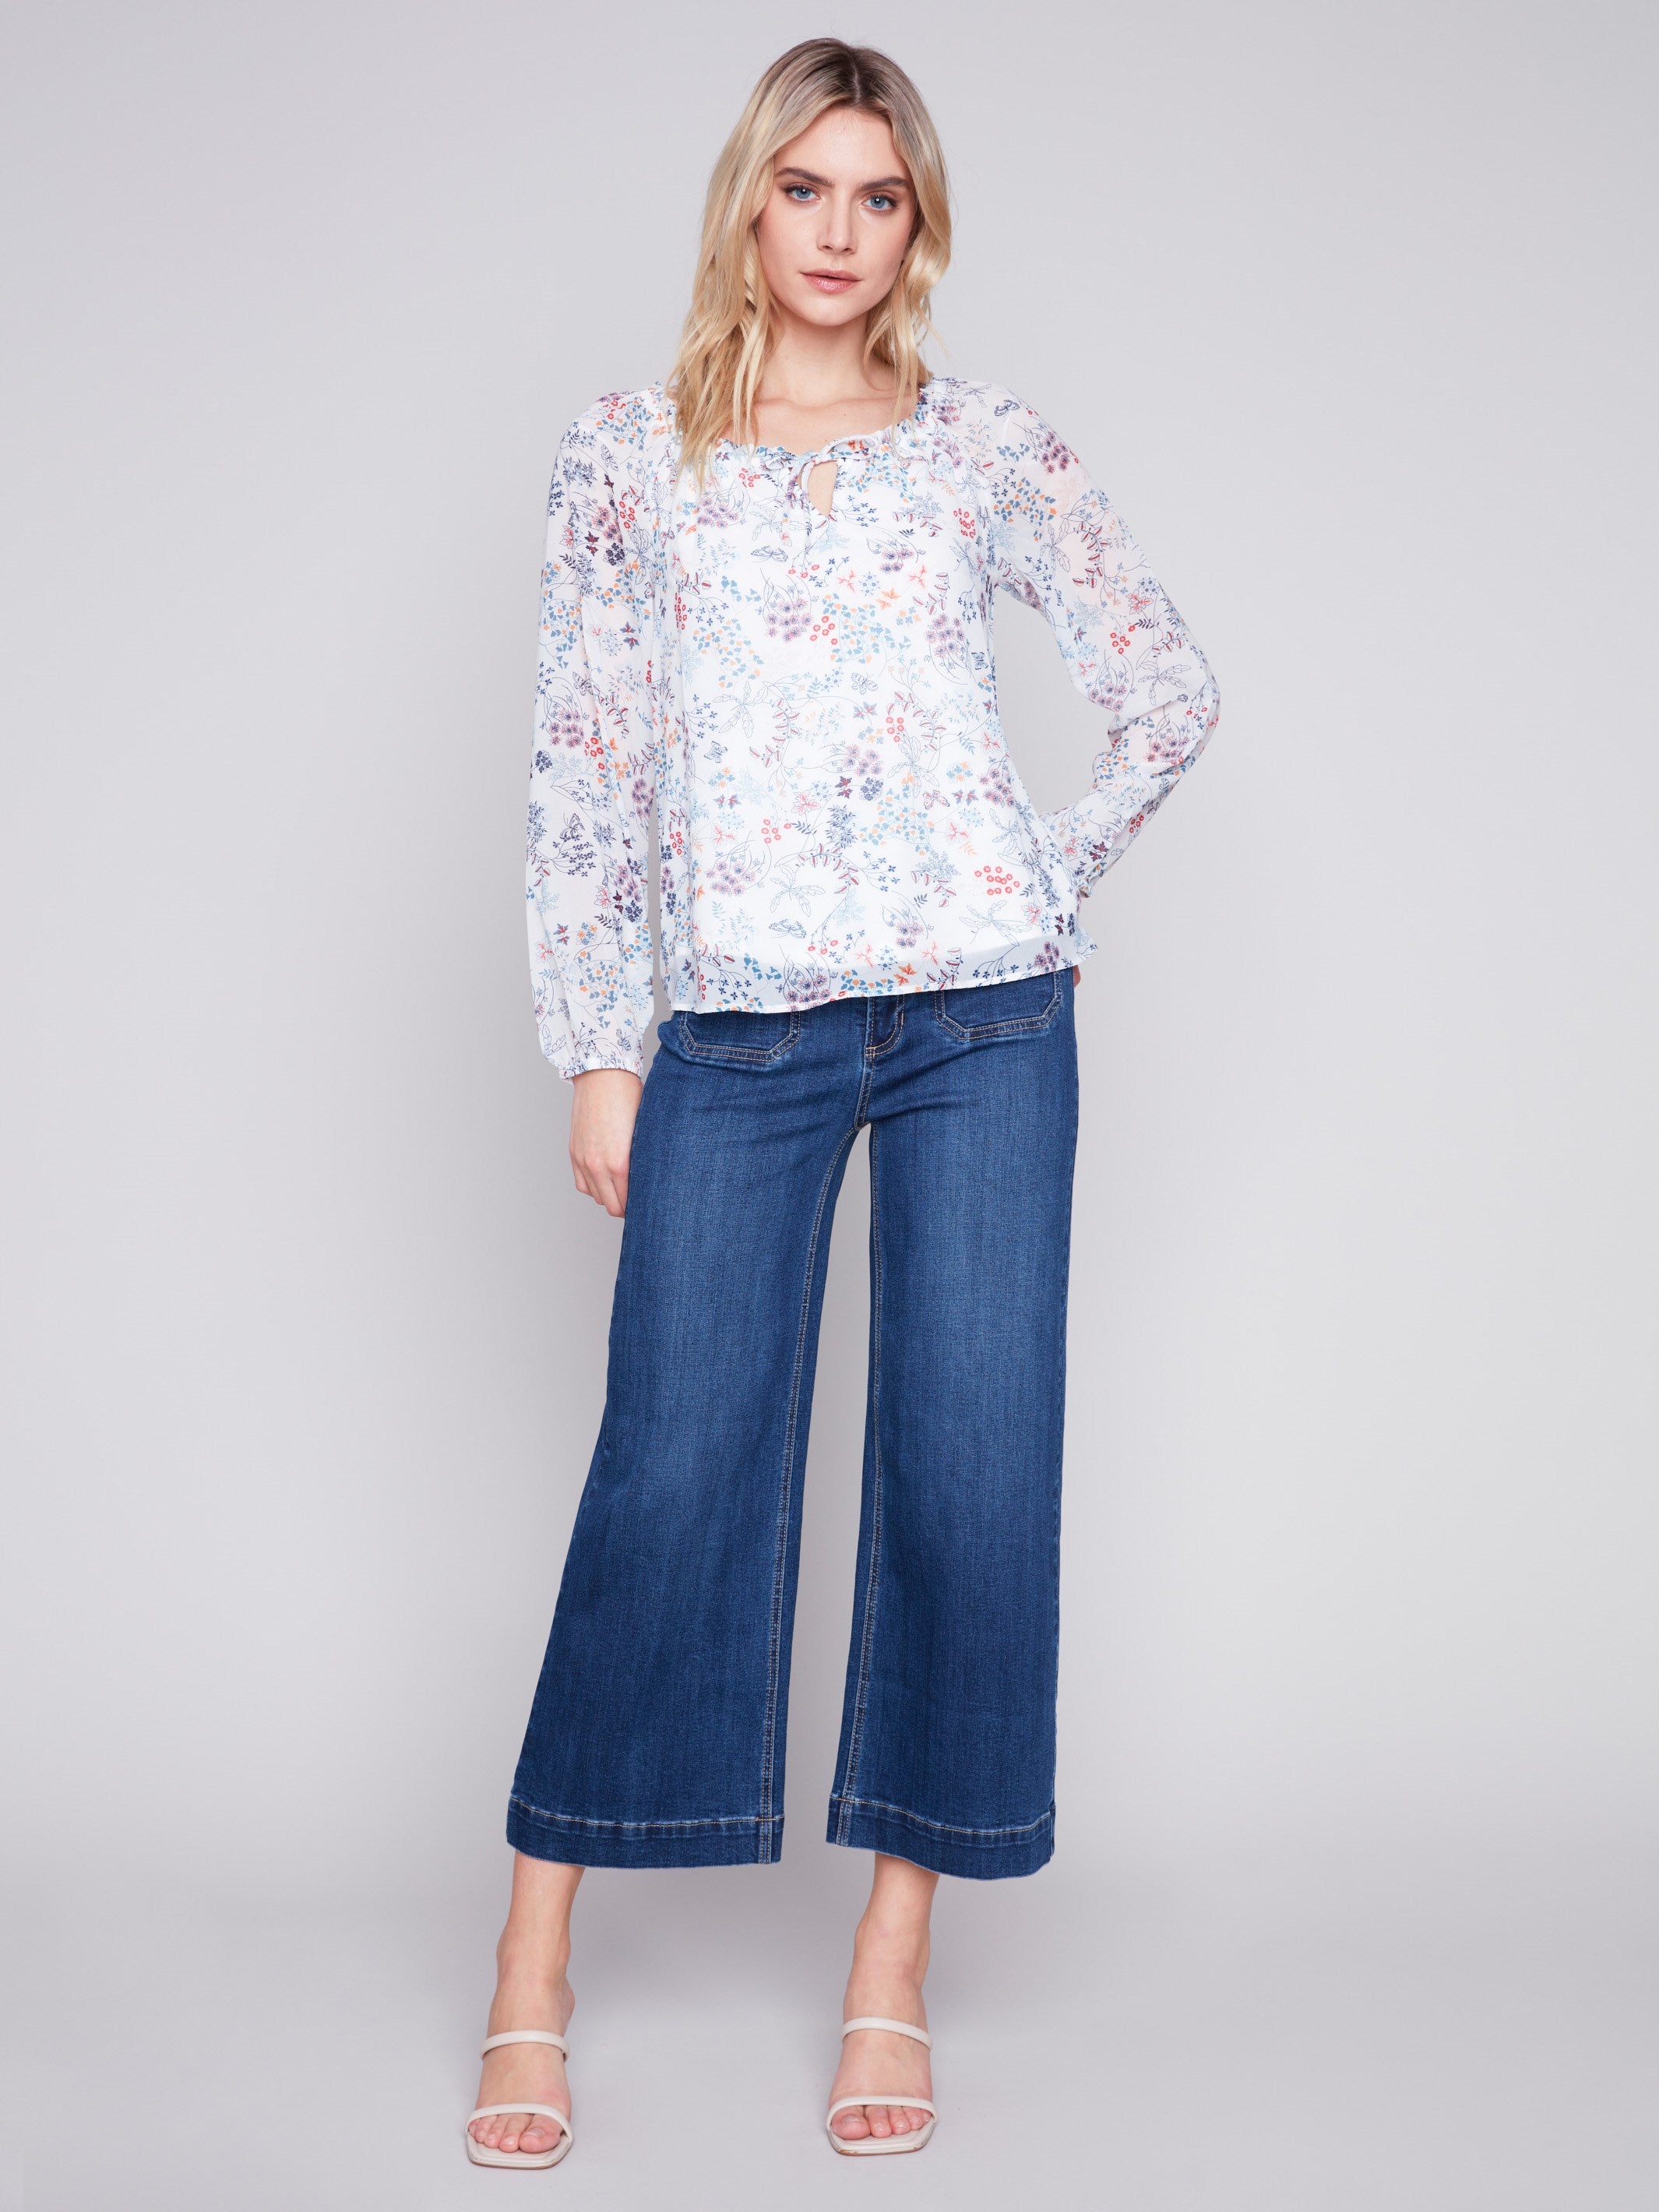 Printed Chiffon Blouse - Blossom - Charlie B Collection Canada - Image 3